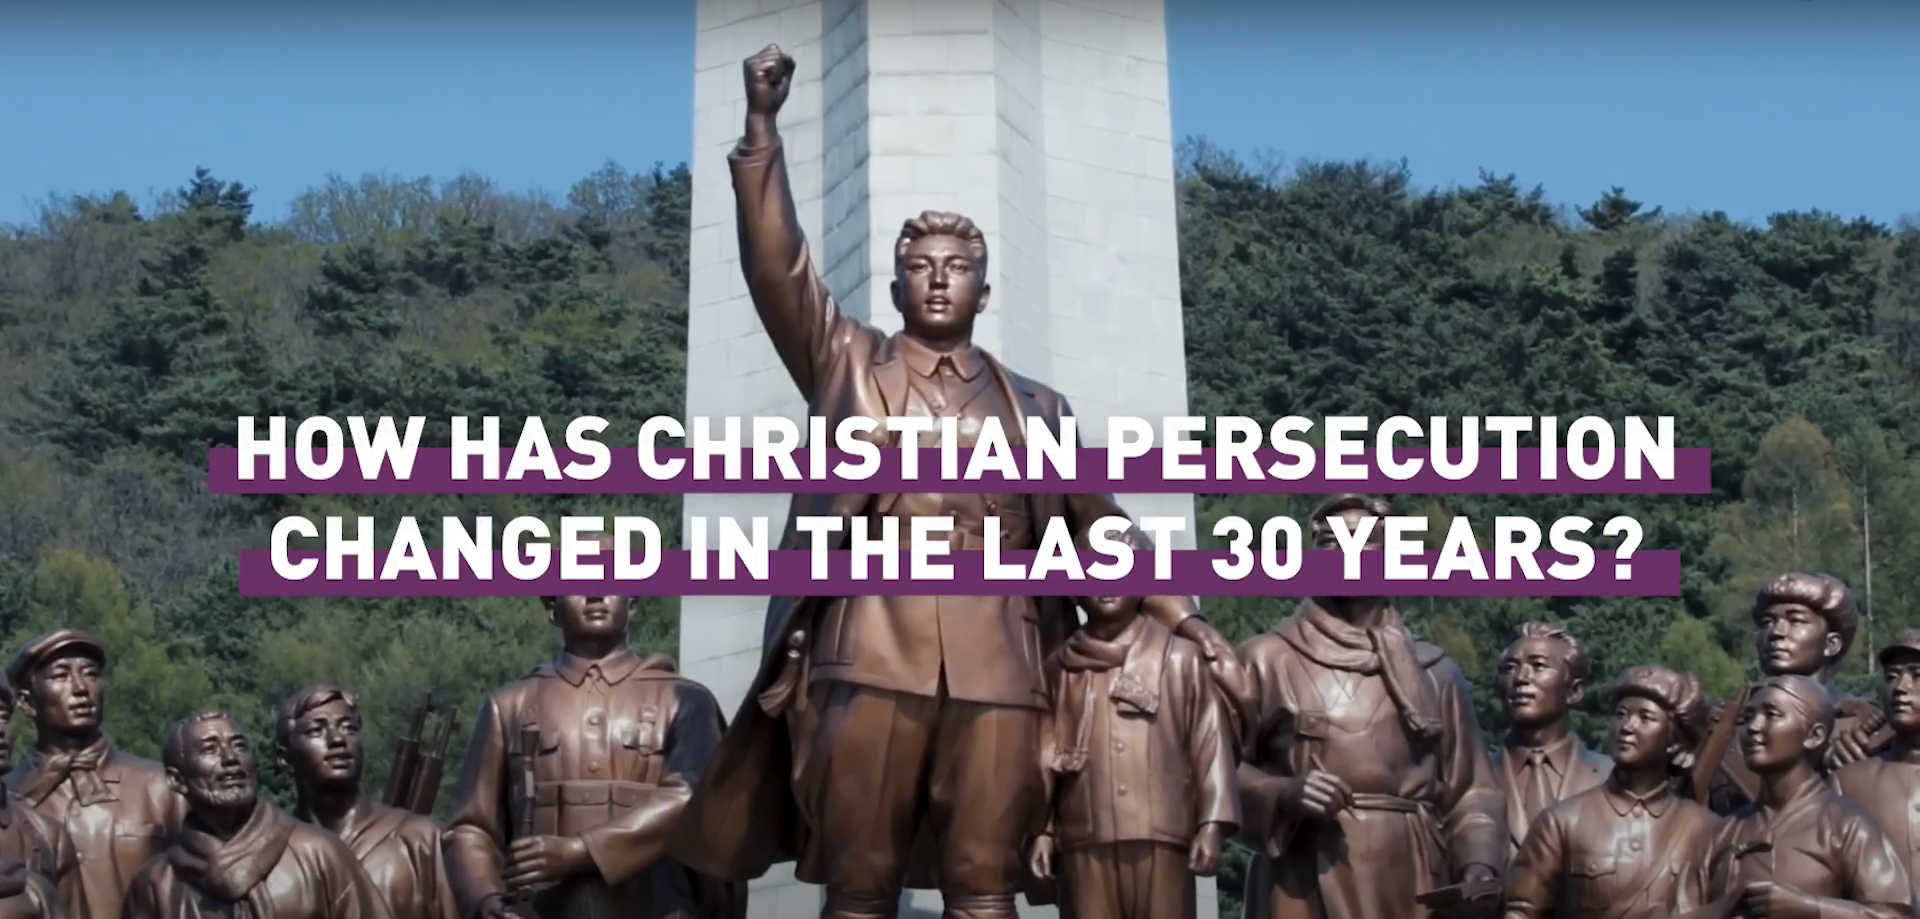 How has Christian persecution changed in the last 30 years?